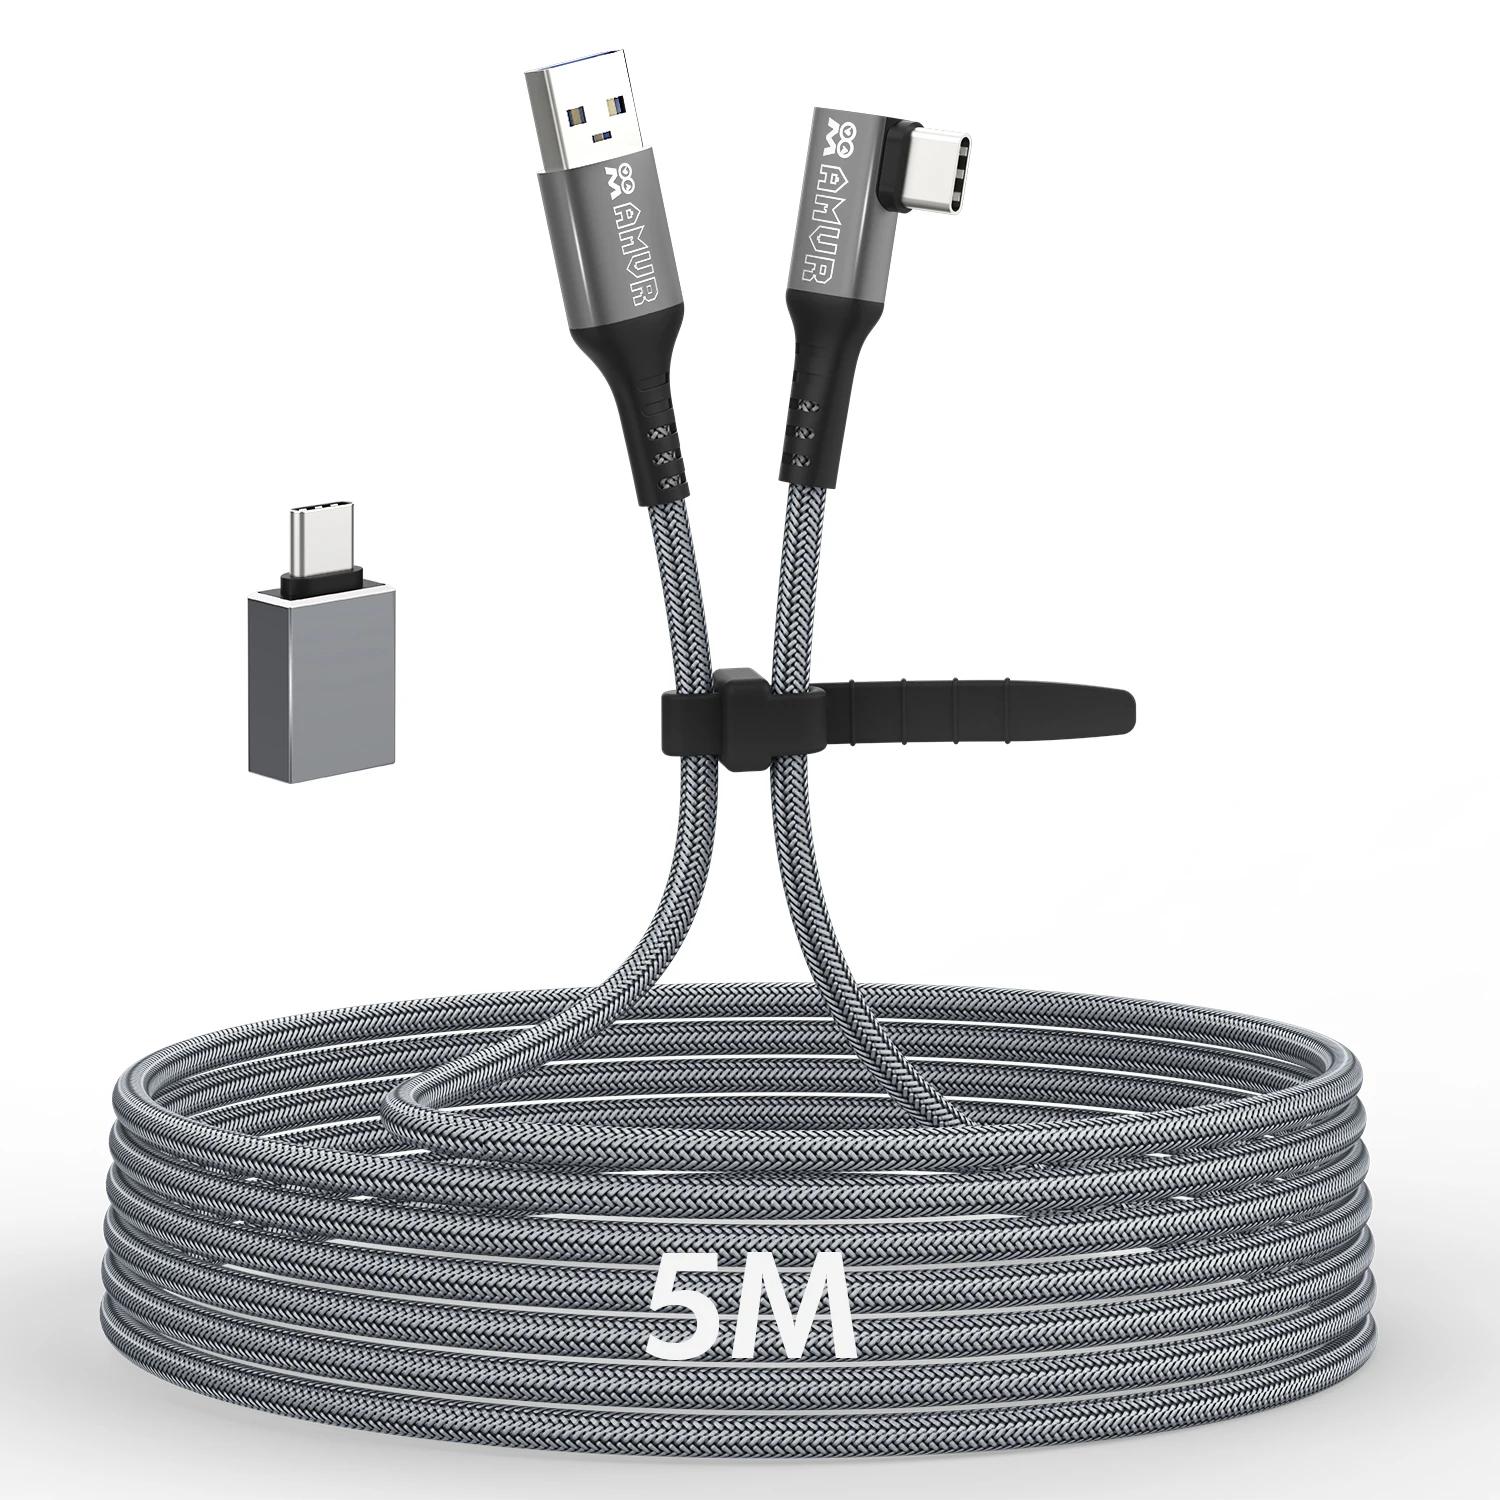 

New VR Cable USB3.0 AMVR Suitable For Oculus Quest 2 Pico 4 Type-c Stream Line 5 Meters Computer Connector Connection Data Link